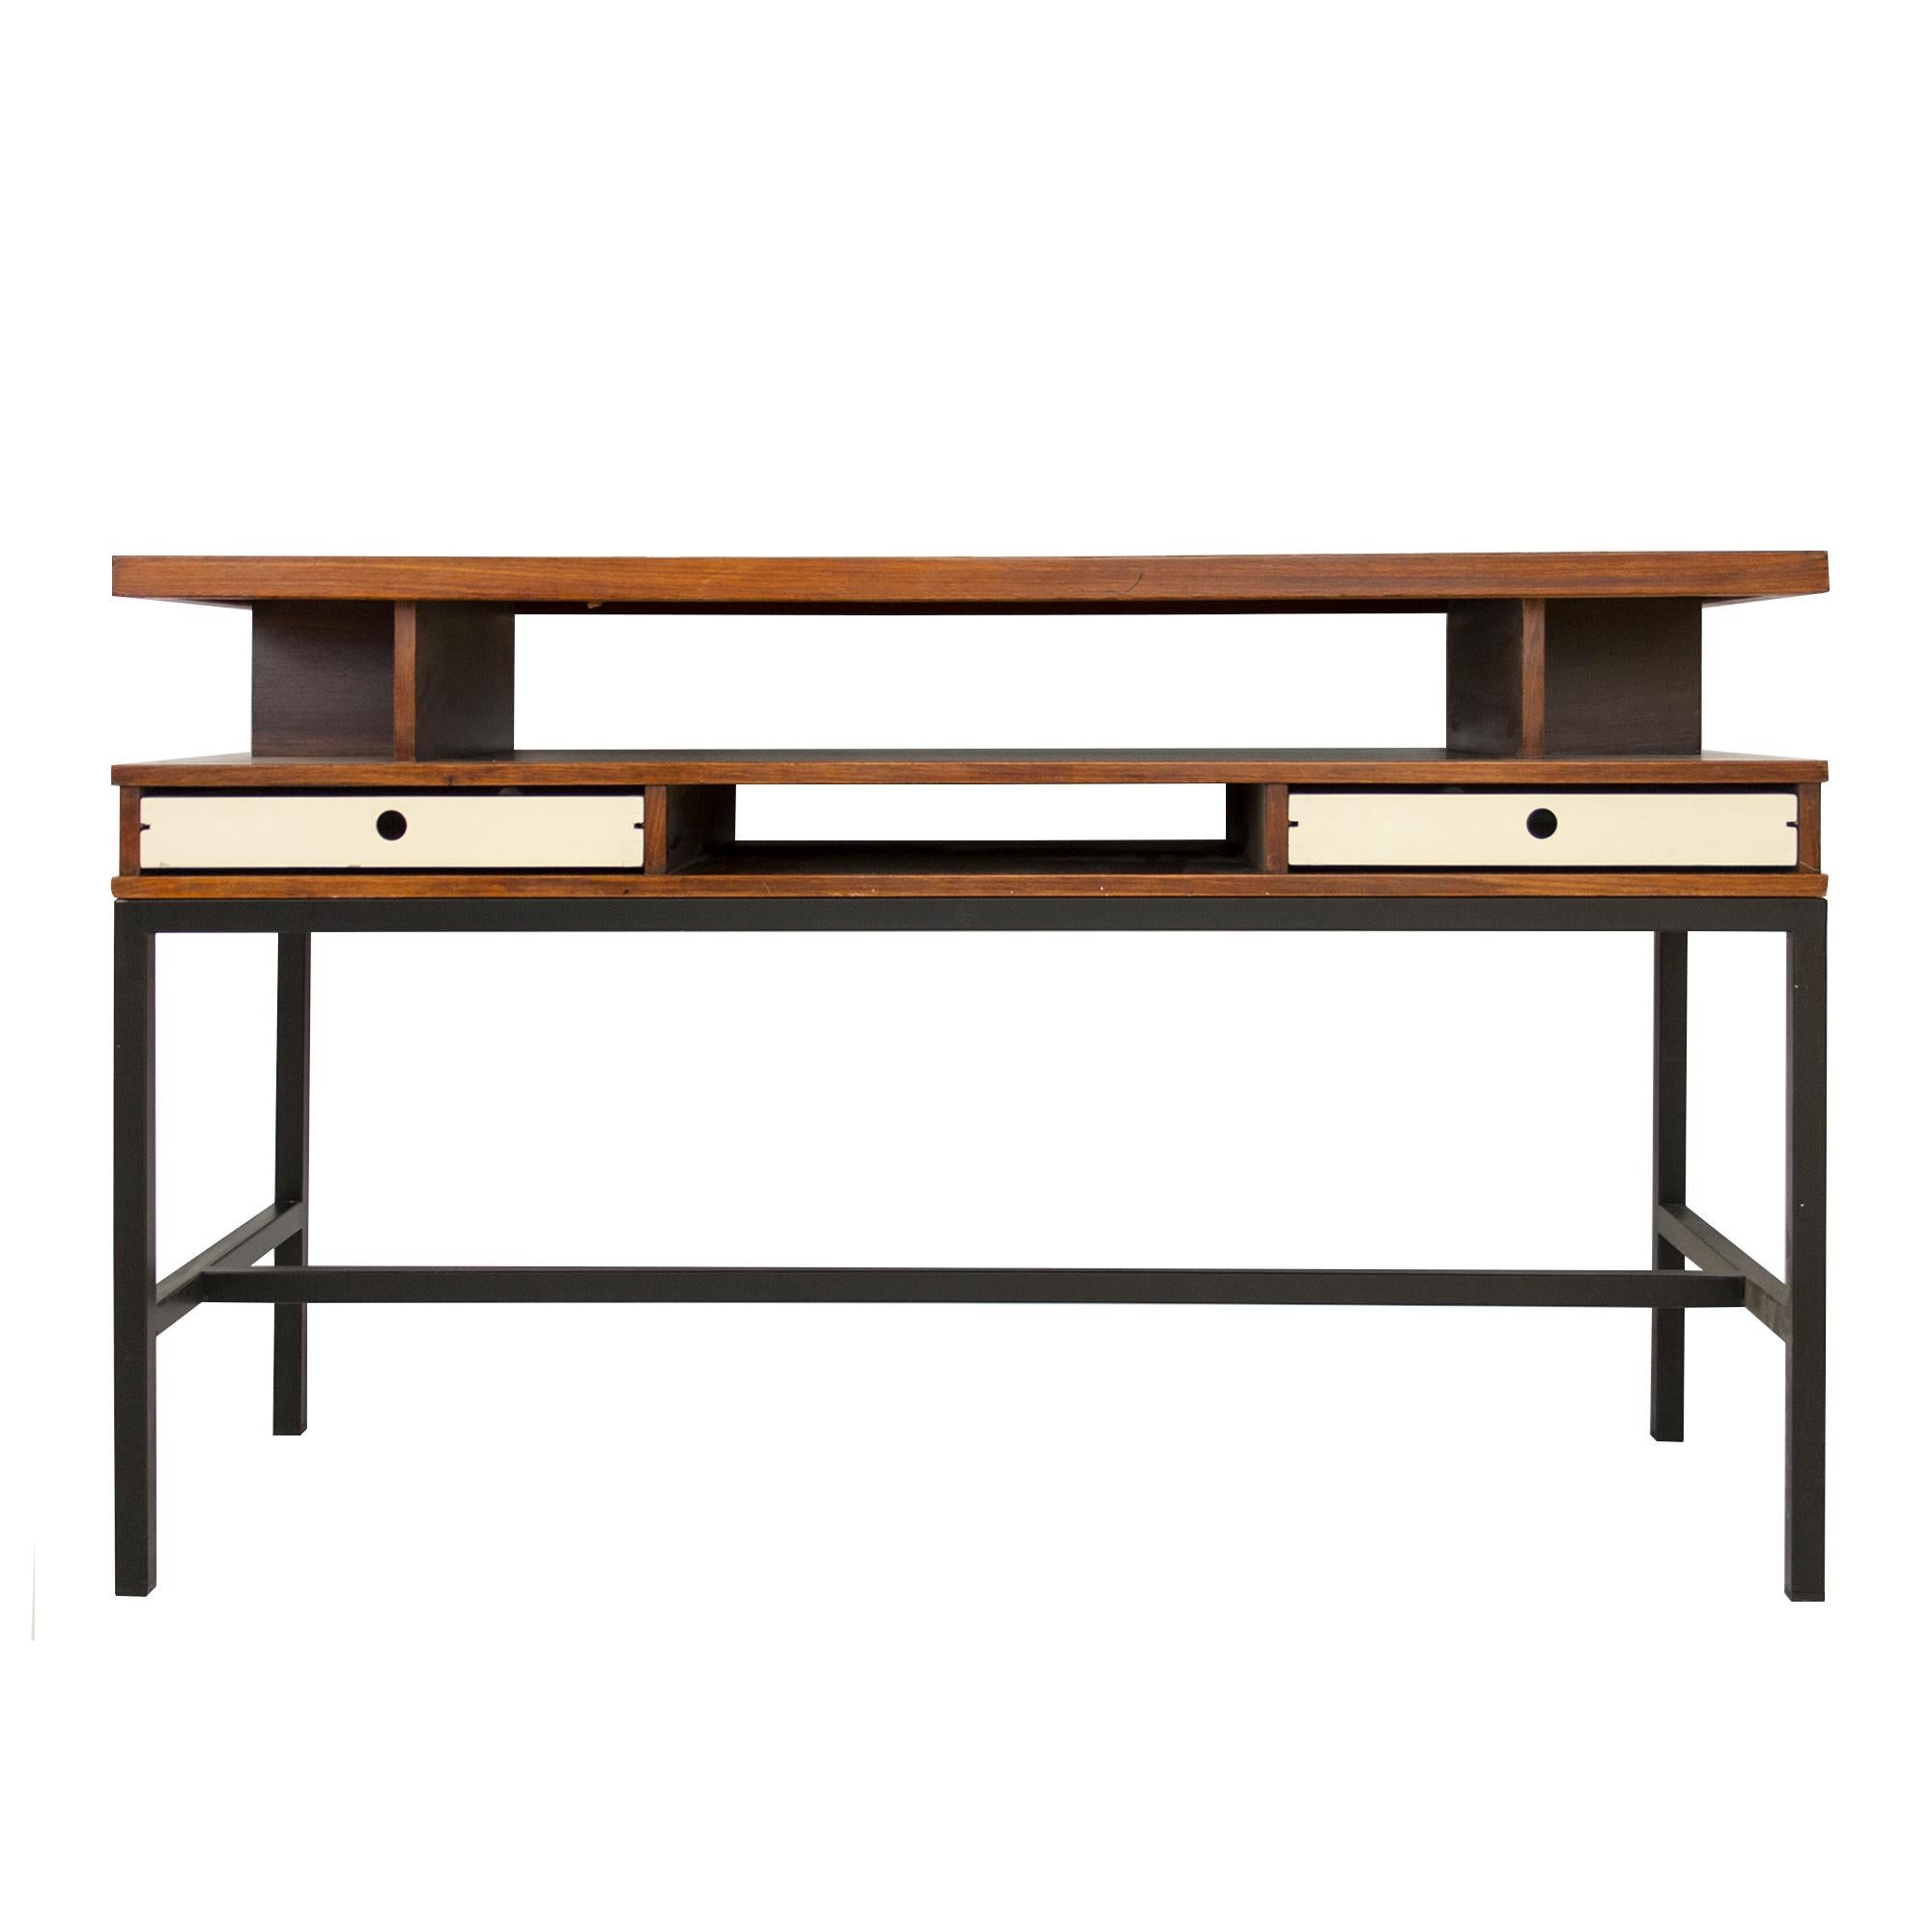 Elegant Italian console table from the mid-20th century composed of a teak wood top with two white lacquered, dual operning sliding drawers over an iron base with black matt lacquered finish. 


